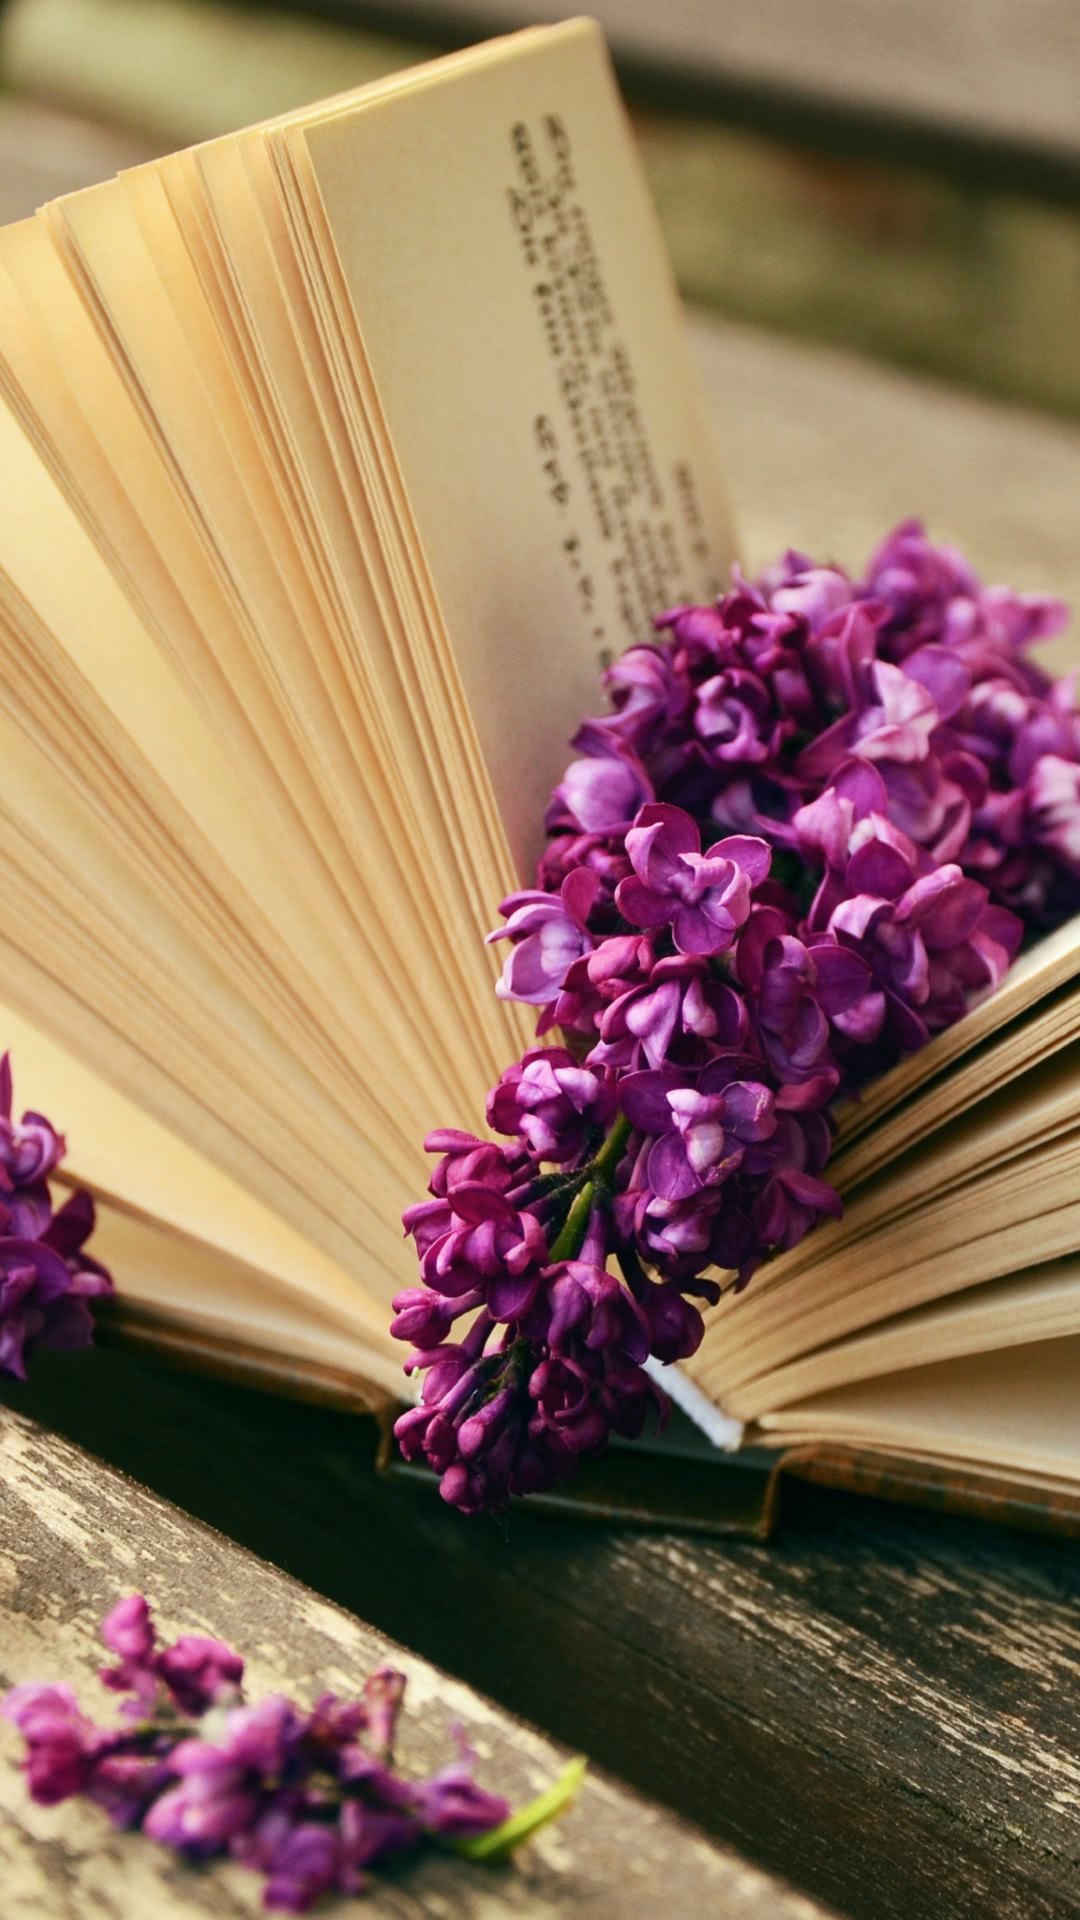 good book and Lilacs